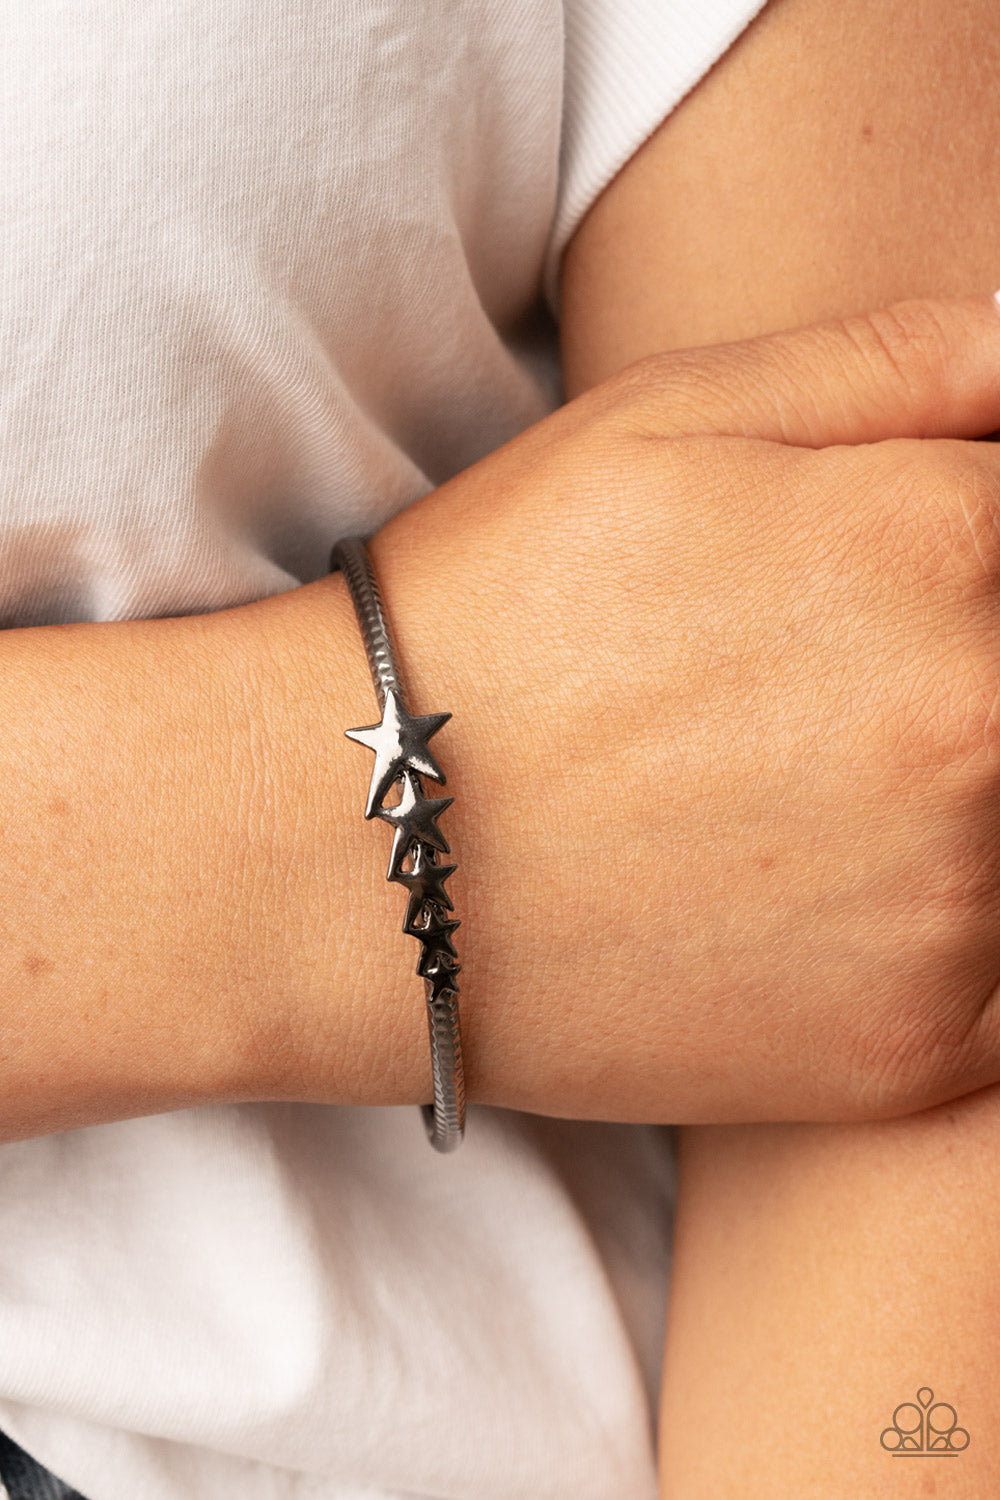 Astrological A-Lister Black Bangle Bracelet - Paparazzi Accessories  Glistening gunmetal stars graduate in size across the center of a textured gunmetal bangle, creating a stackable stellar centerpiece around the wrist.  Sold as one individual bracelet.